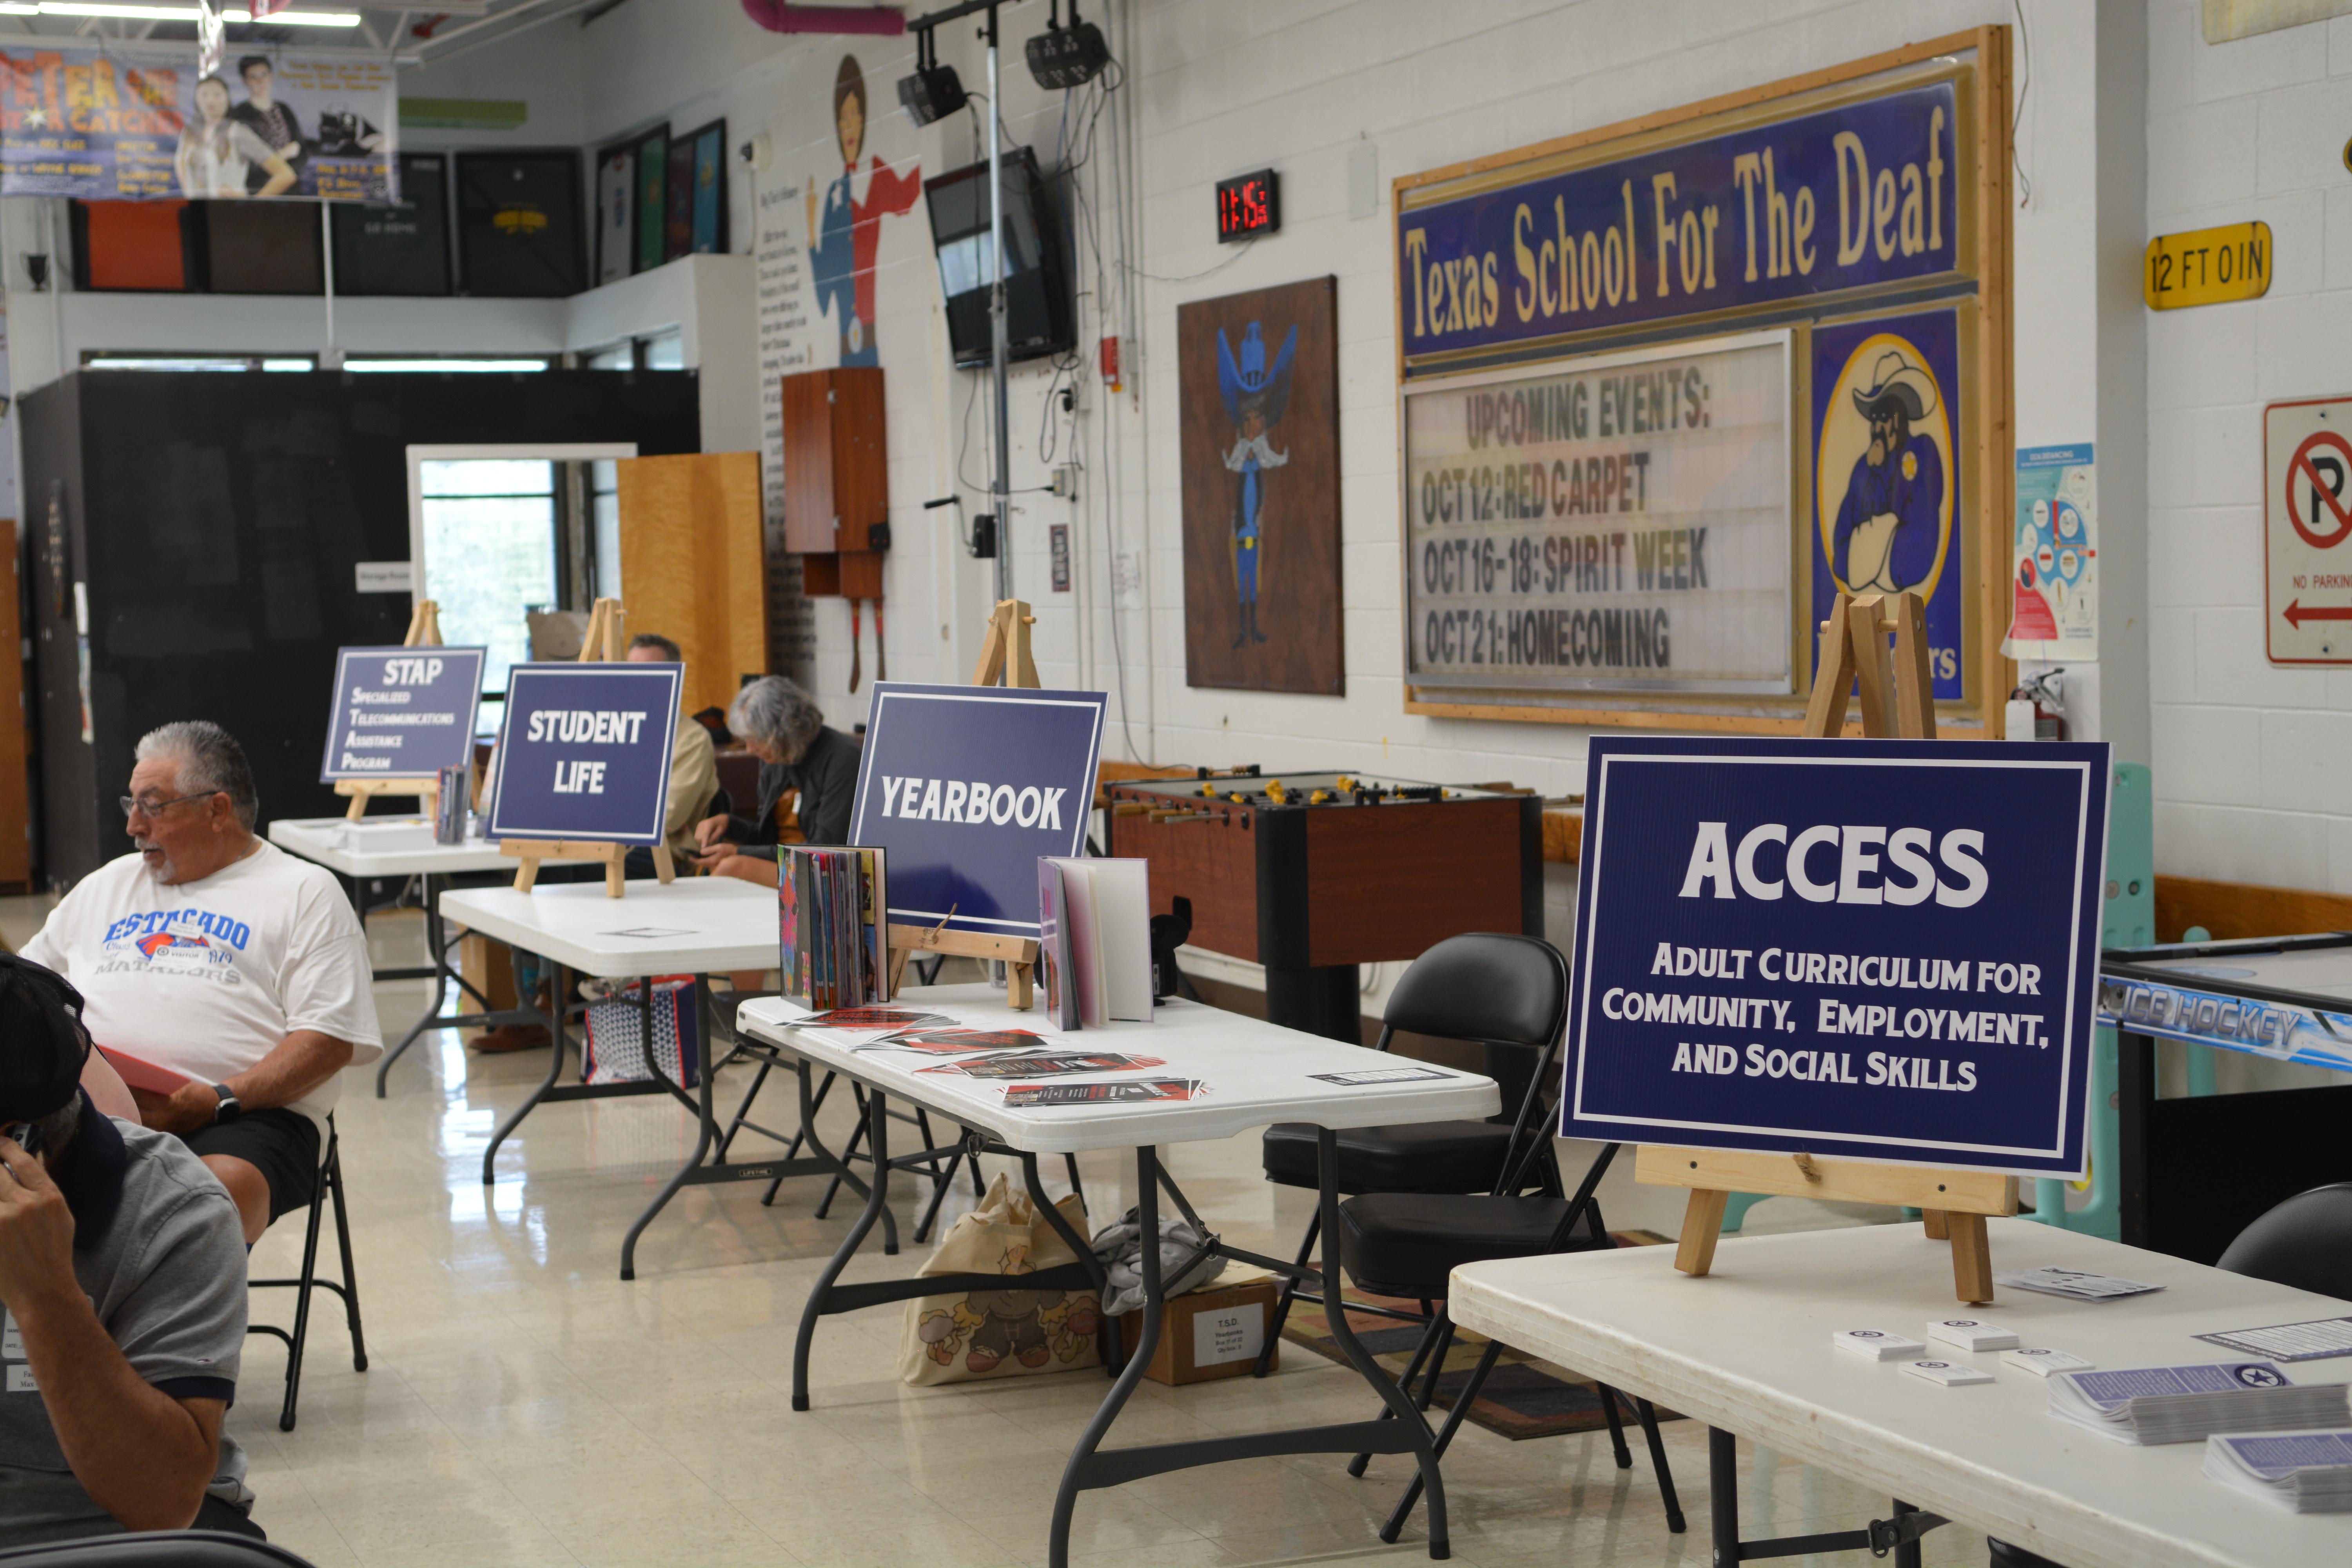 4 tables with poster stands in the order from front to back: ACCESS Adult Curriculum for Community, Employment, and Social Skills, Yearbook, Student Life, and lastly, STAP Specialized Telecommunications Assistance Program with people in the background.